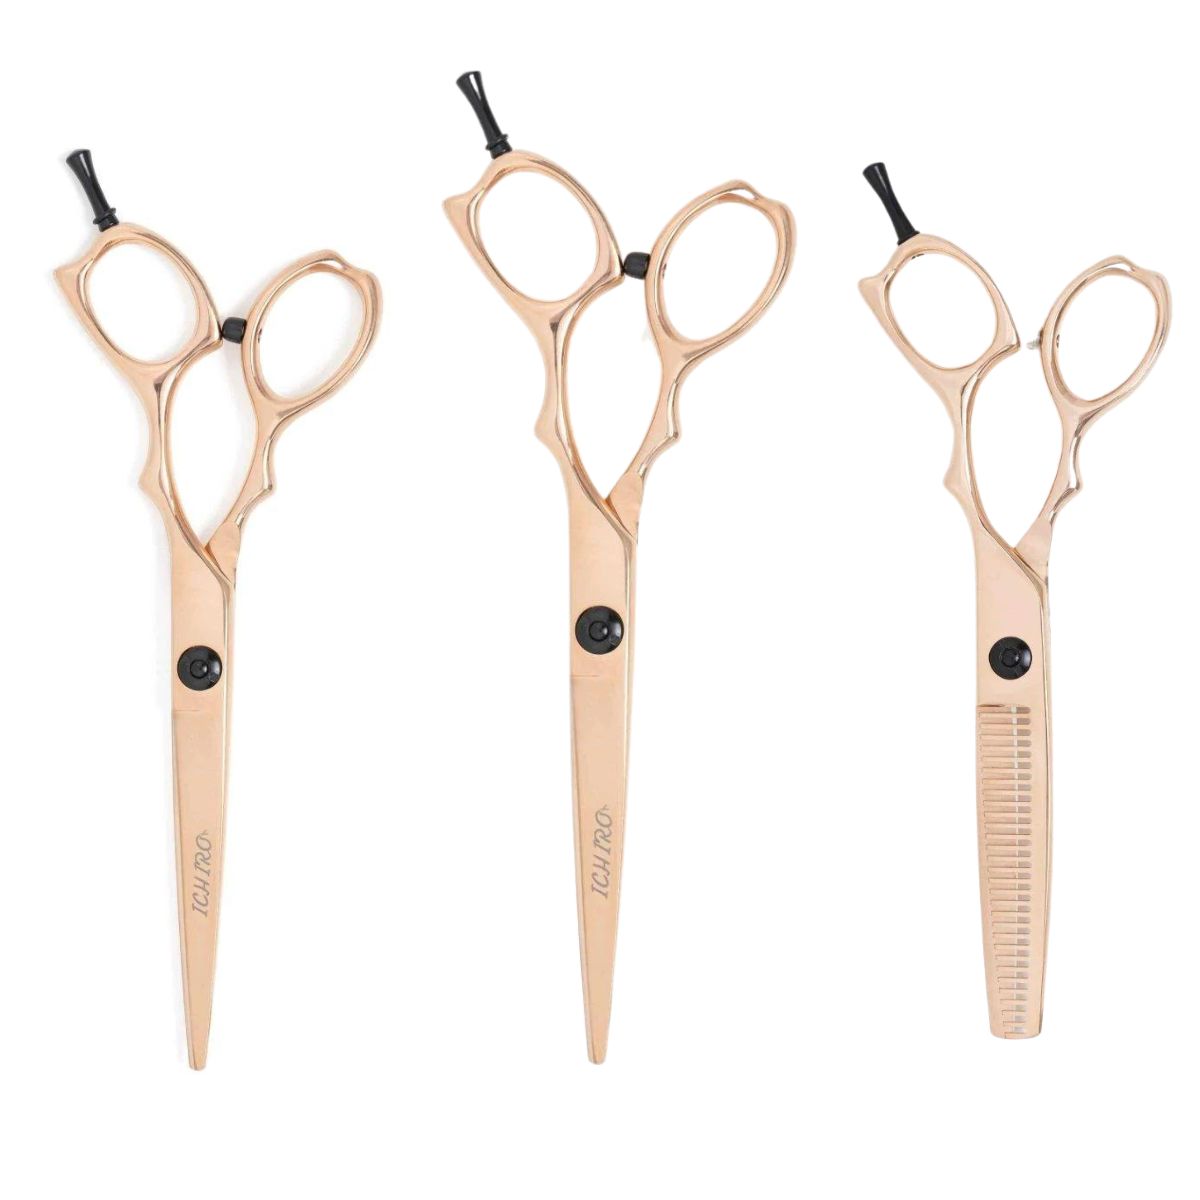 Above Ergo 30T Rose Gold Thinning Hair Cutting Shears - 6.0 (#21106030) -  Above Shears